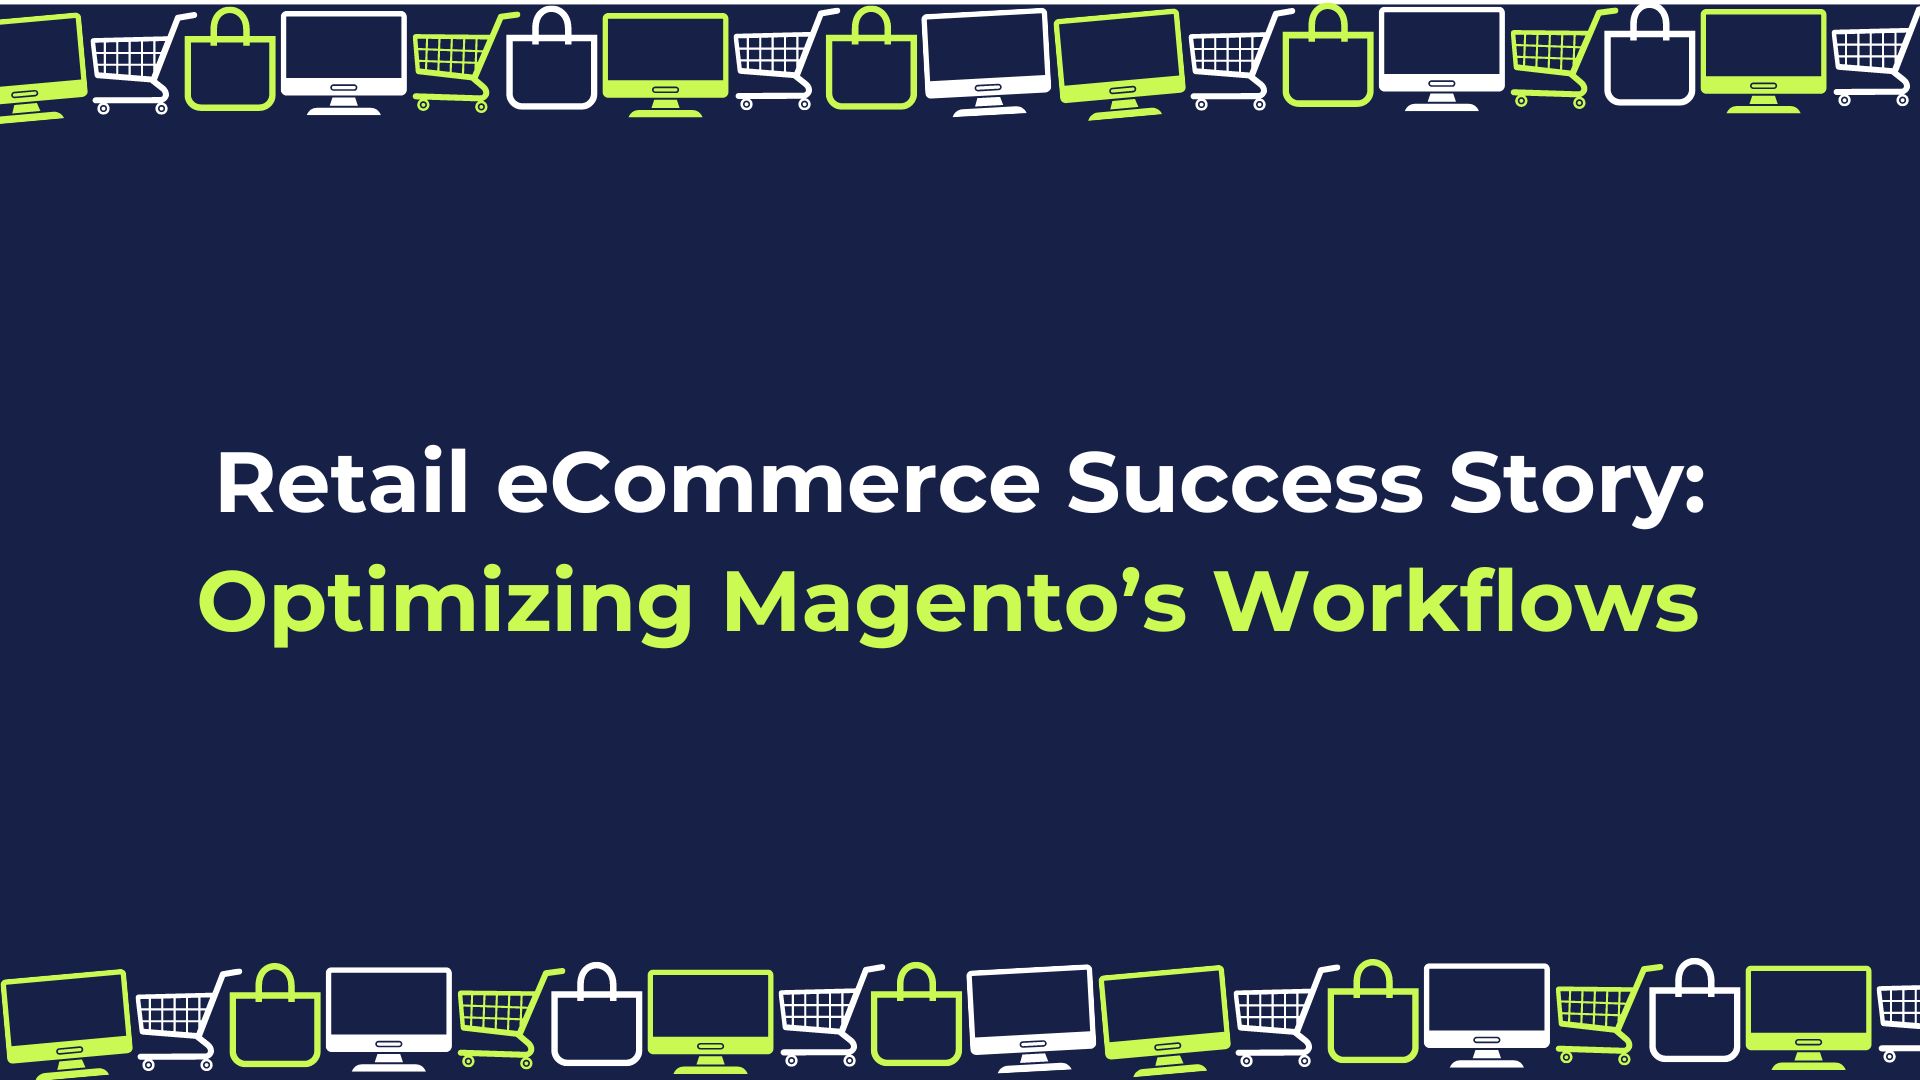 Retail eCommerce Success Story: Optimizing Magento’s Workflows